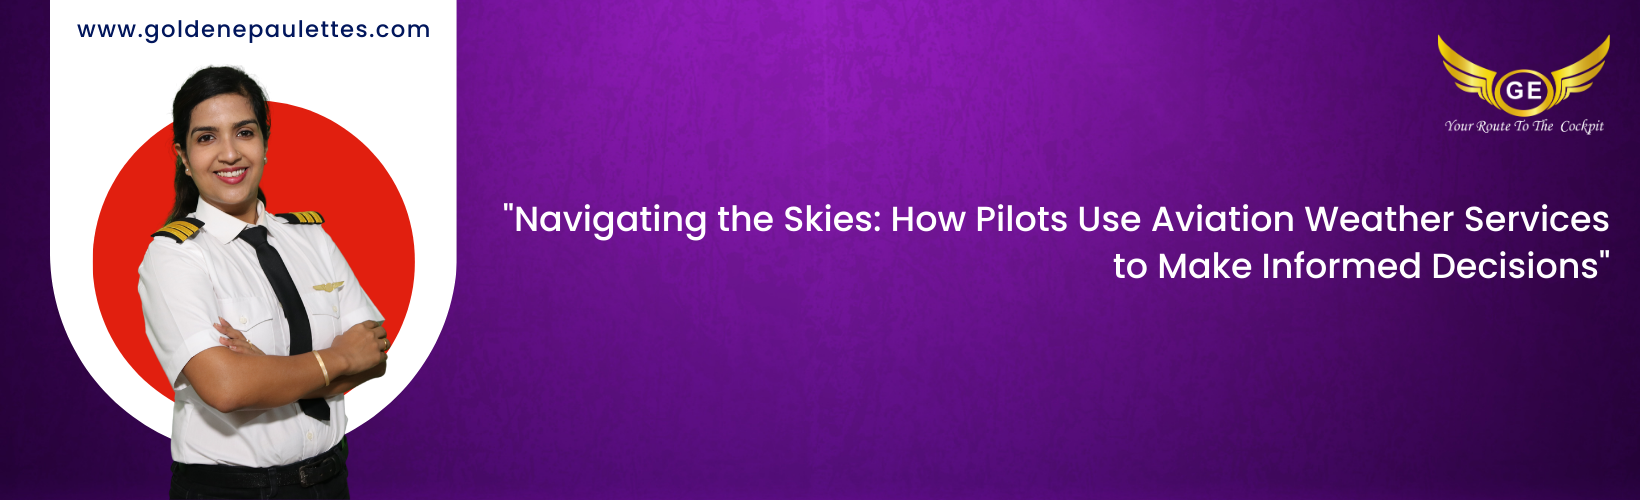 The Use of Aviation Weather Services by Pilots